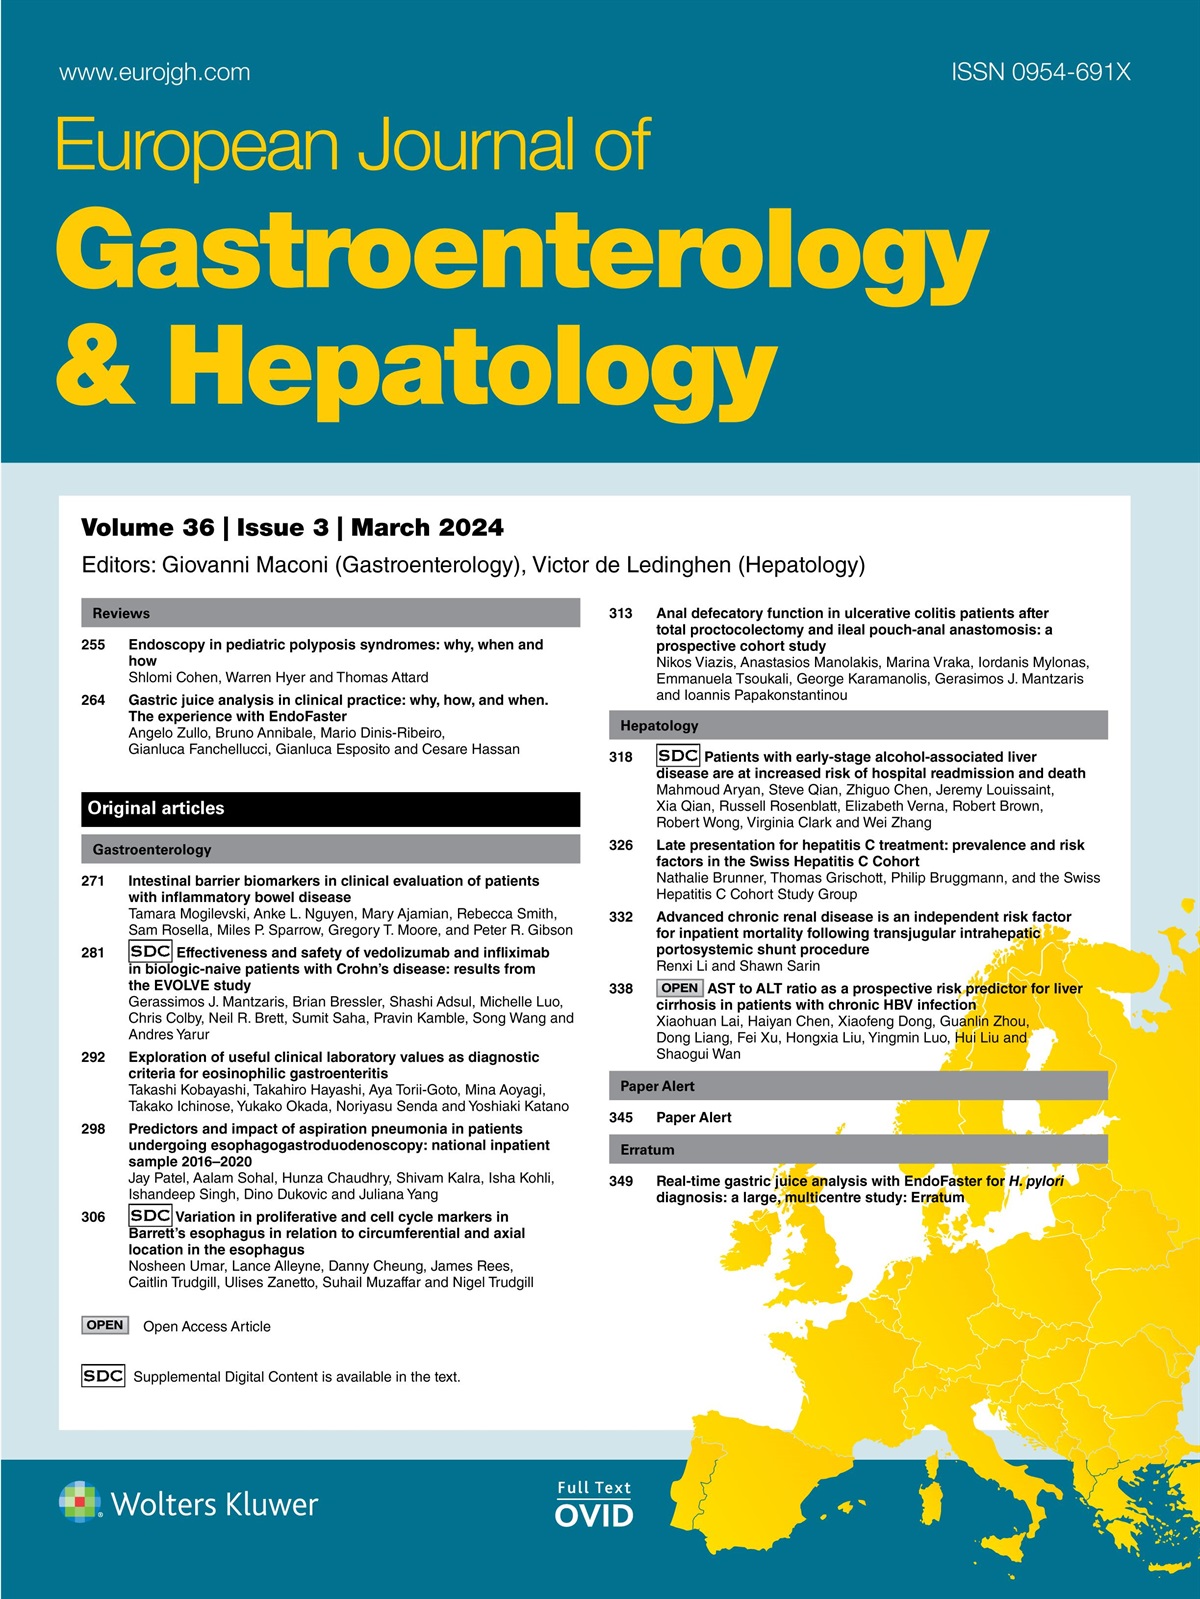 Real-time gastric juice analysis with EndoFaster for H. pylori diagnosis: a large, multicentre study: Erratum